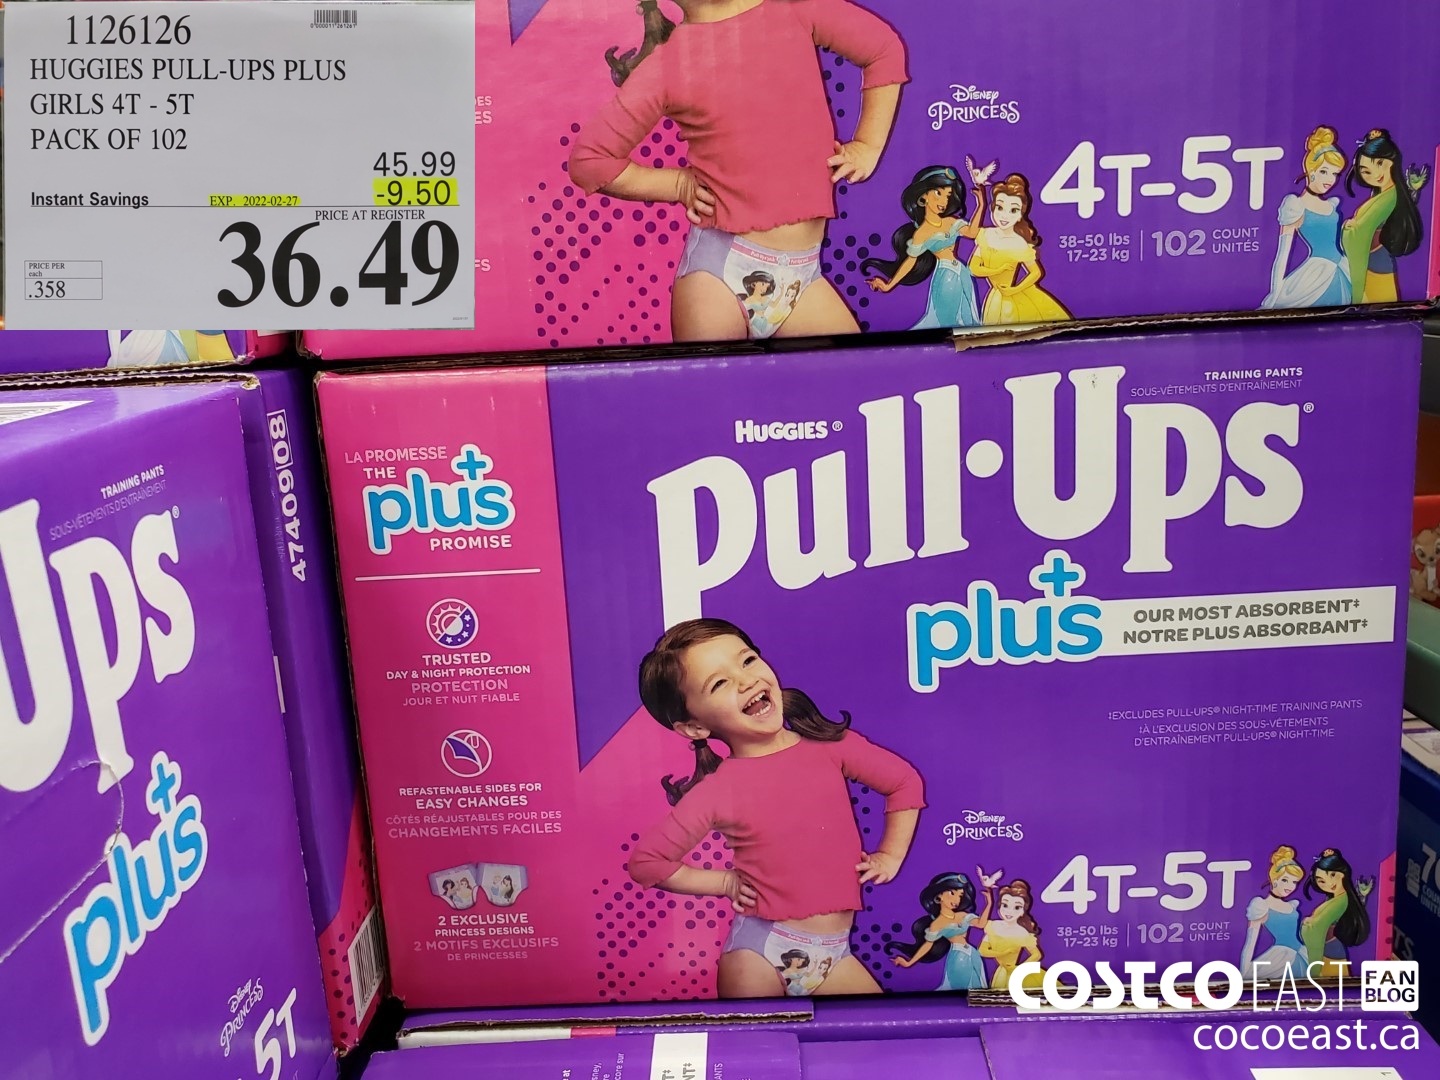 1126126 HUGGIES PULL UPS PLUS BOYS OR GIRLS 4T 5T PACK OF 102 9 50 INSTANT  SAVINGS EXPIRES ON 2022 02 27 36 49 - Costco East Fan Blog